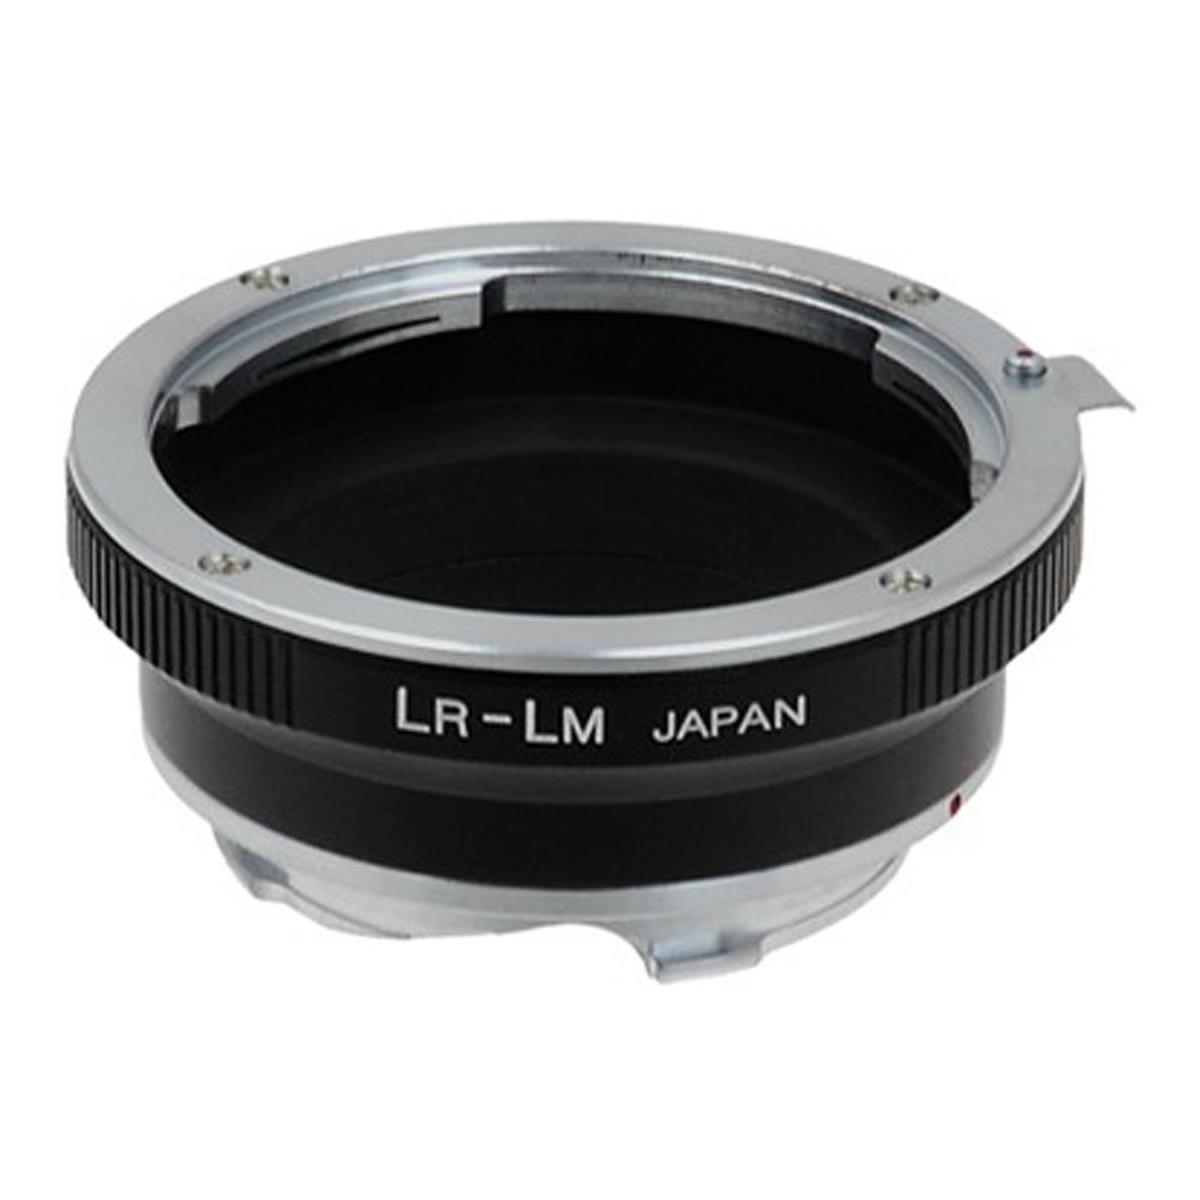 Image of Fotodiox Mount Adapter for Leica R Lens to Leica M Camera